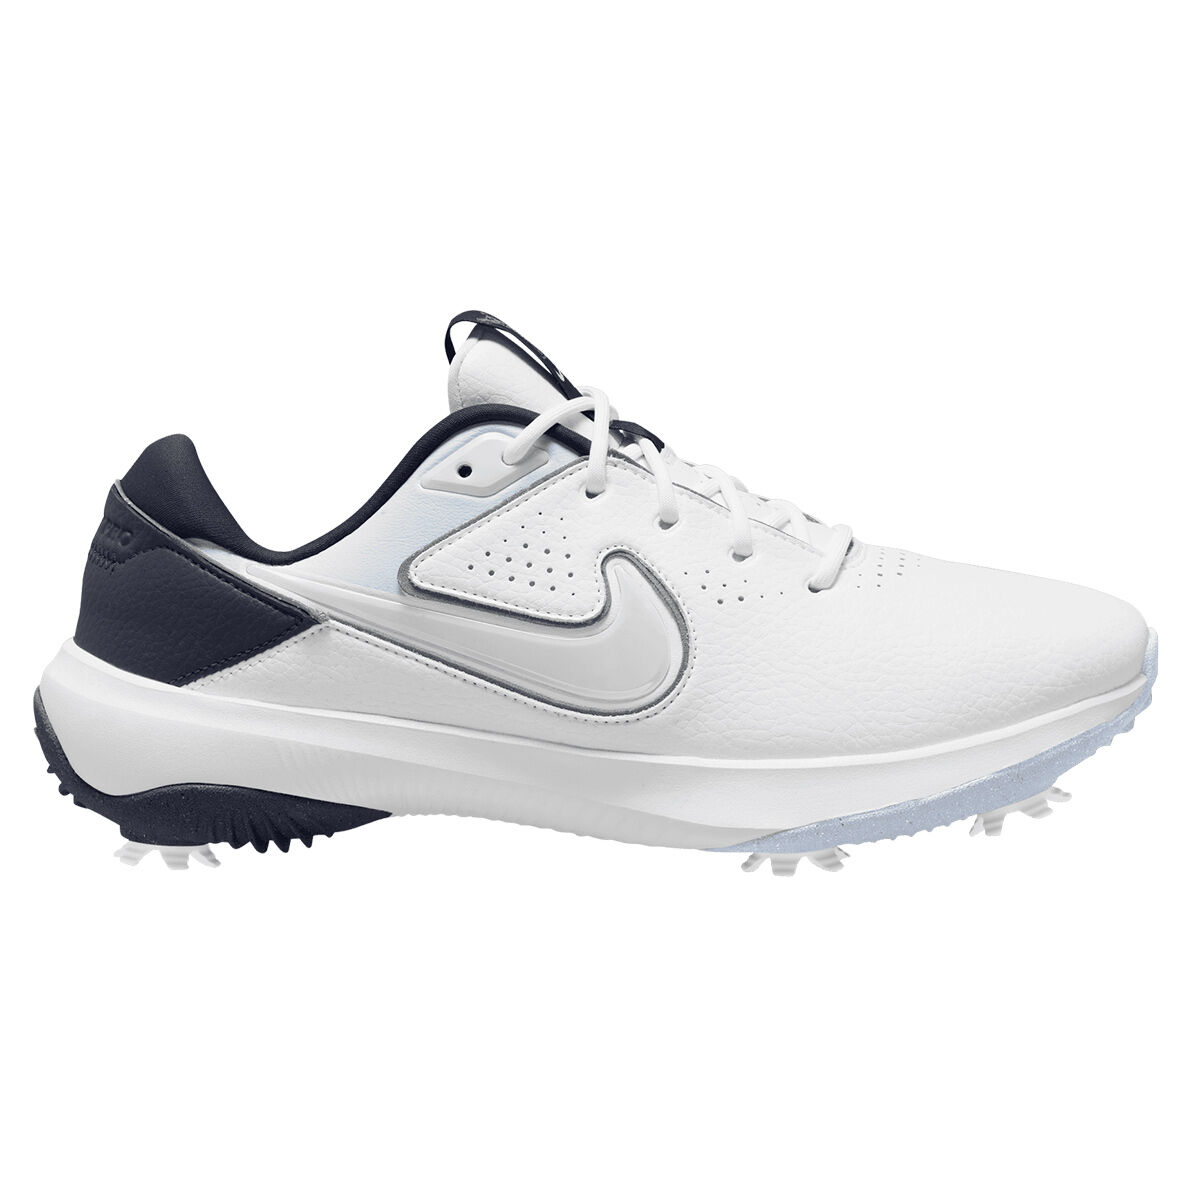 Nike Men’s Victory Pro 3 Waterproof Spiked Golf Shoes, Mens, White/football grey/obsidian, 8 | American Golf